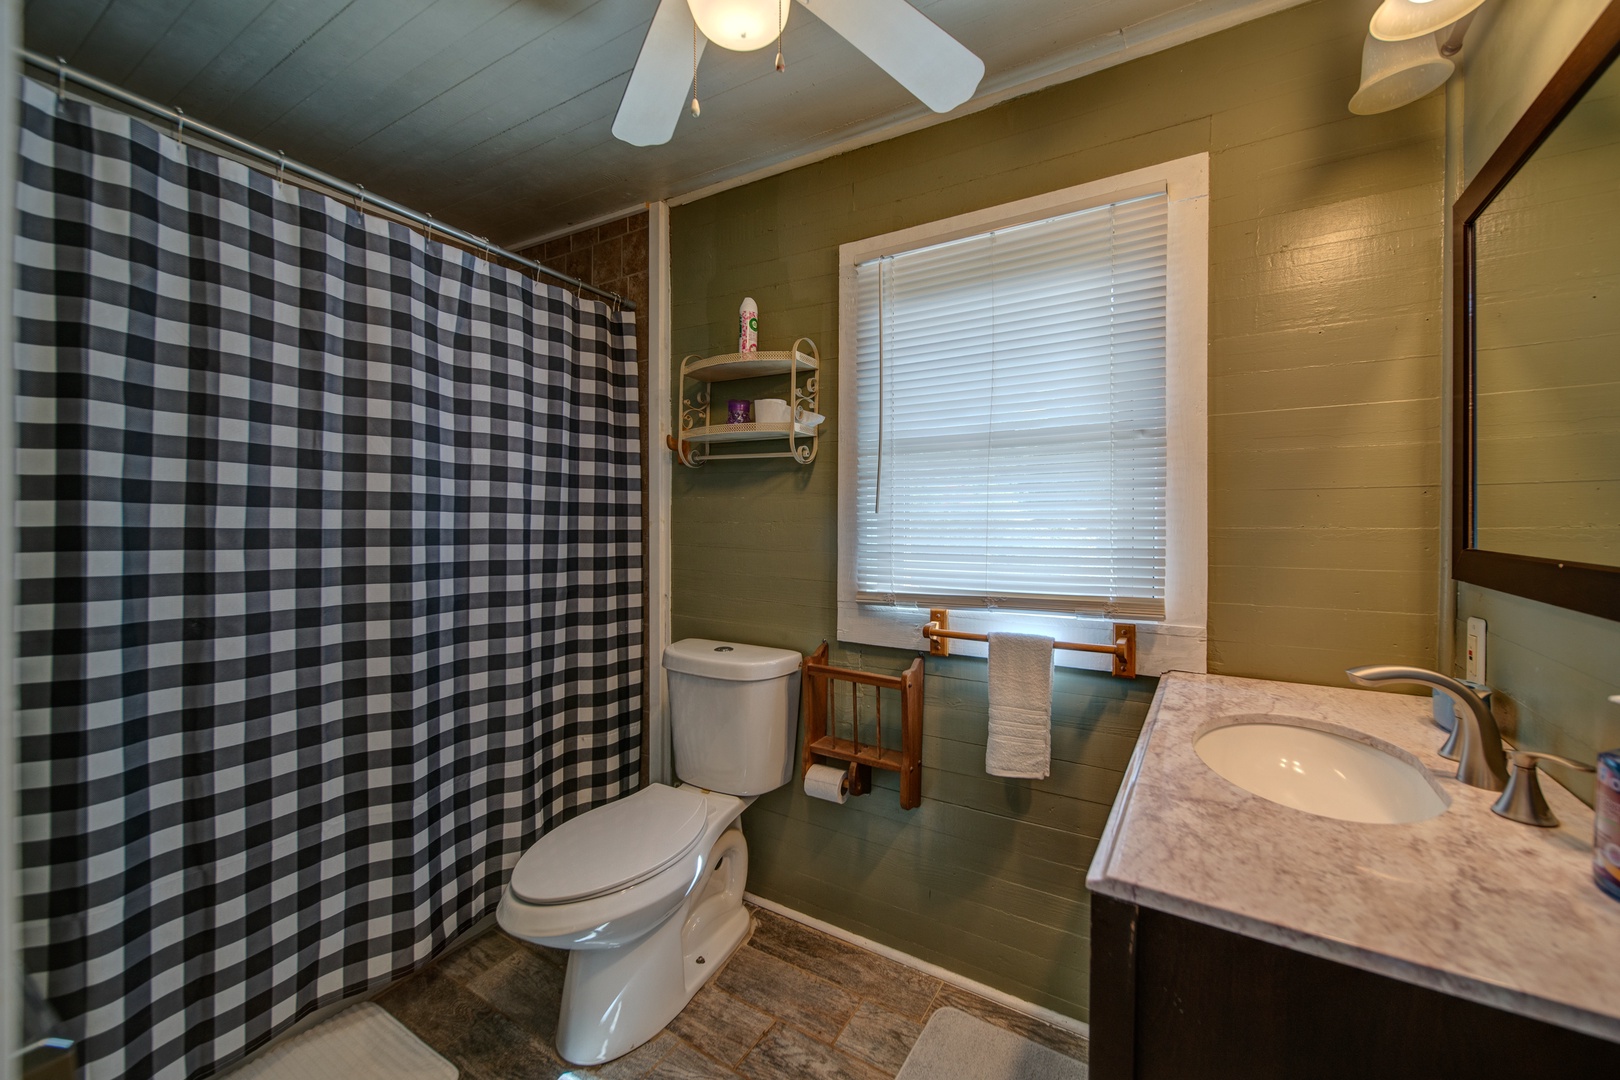 This charming full bathroom includes a single vanity & shower/tub combo